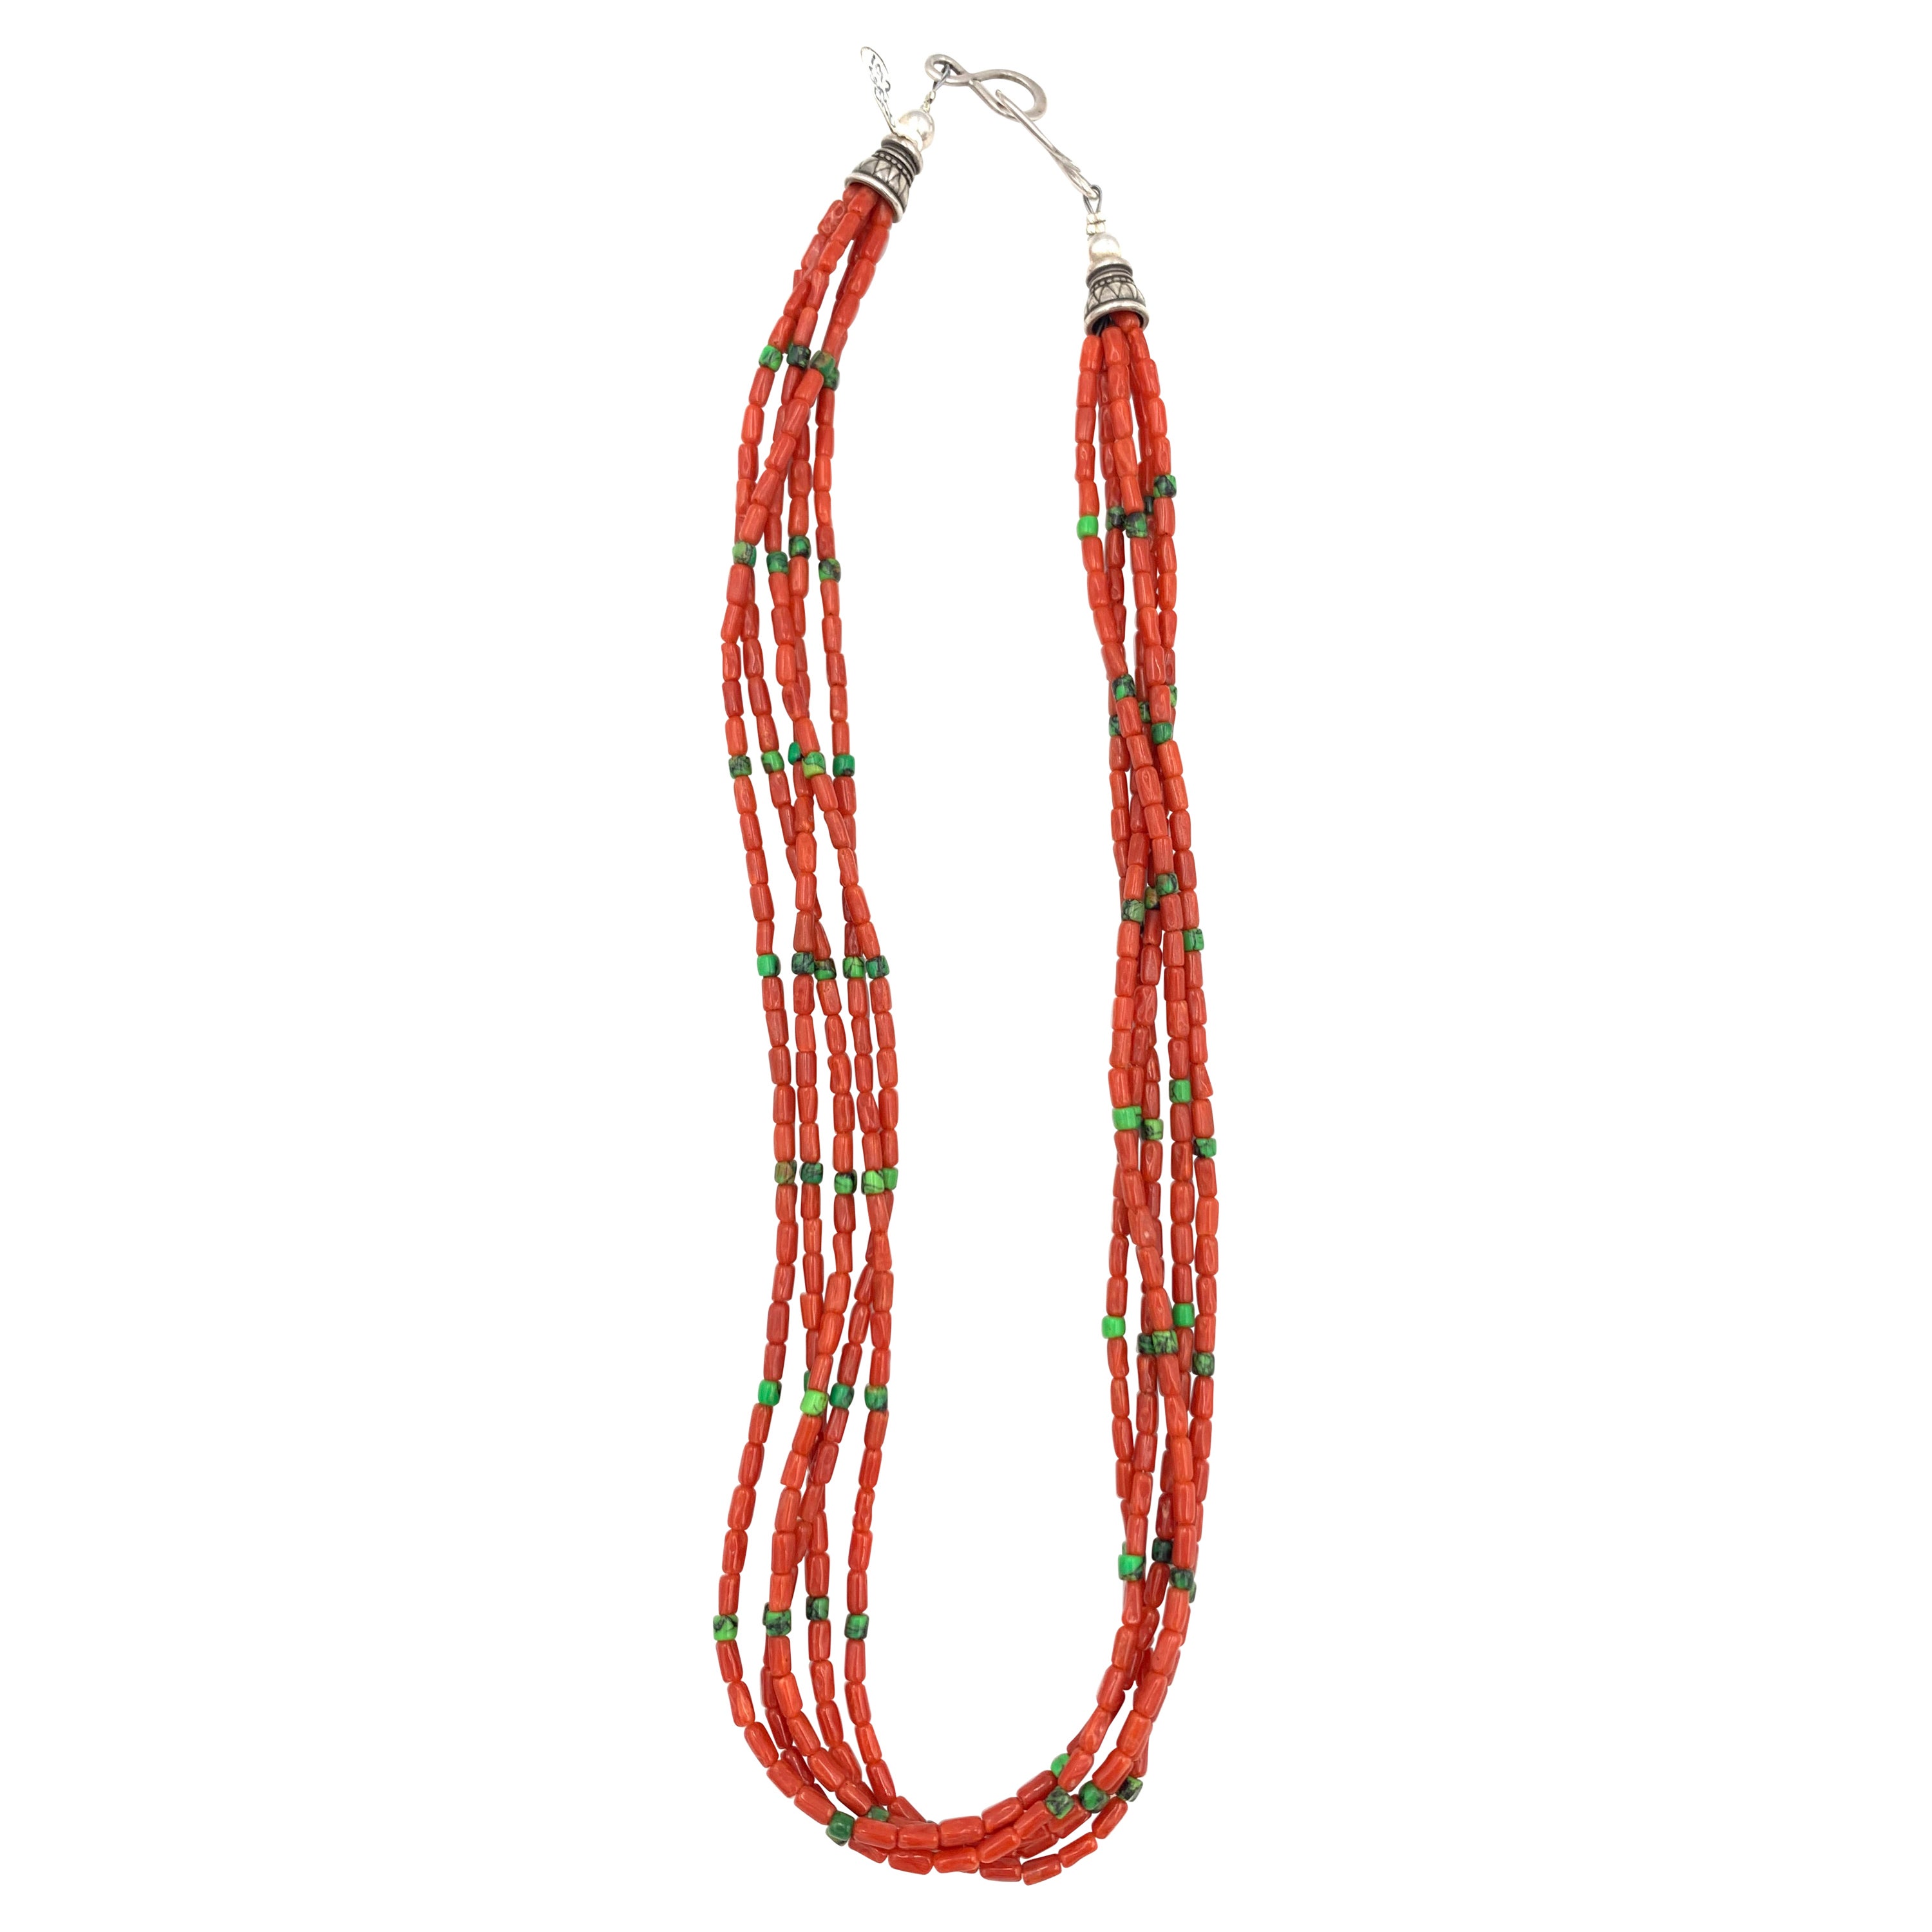 Contemporary Heishi Style Coral Beaded Necklace with Five Strands.